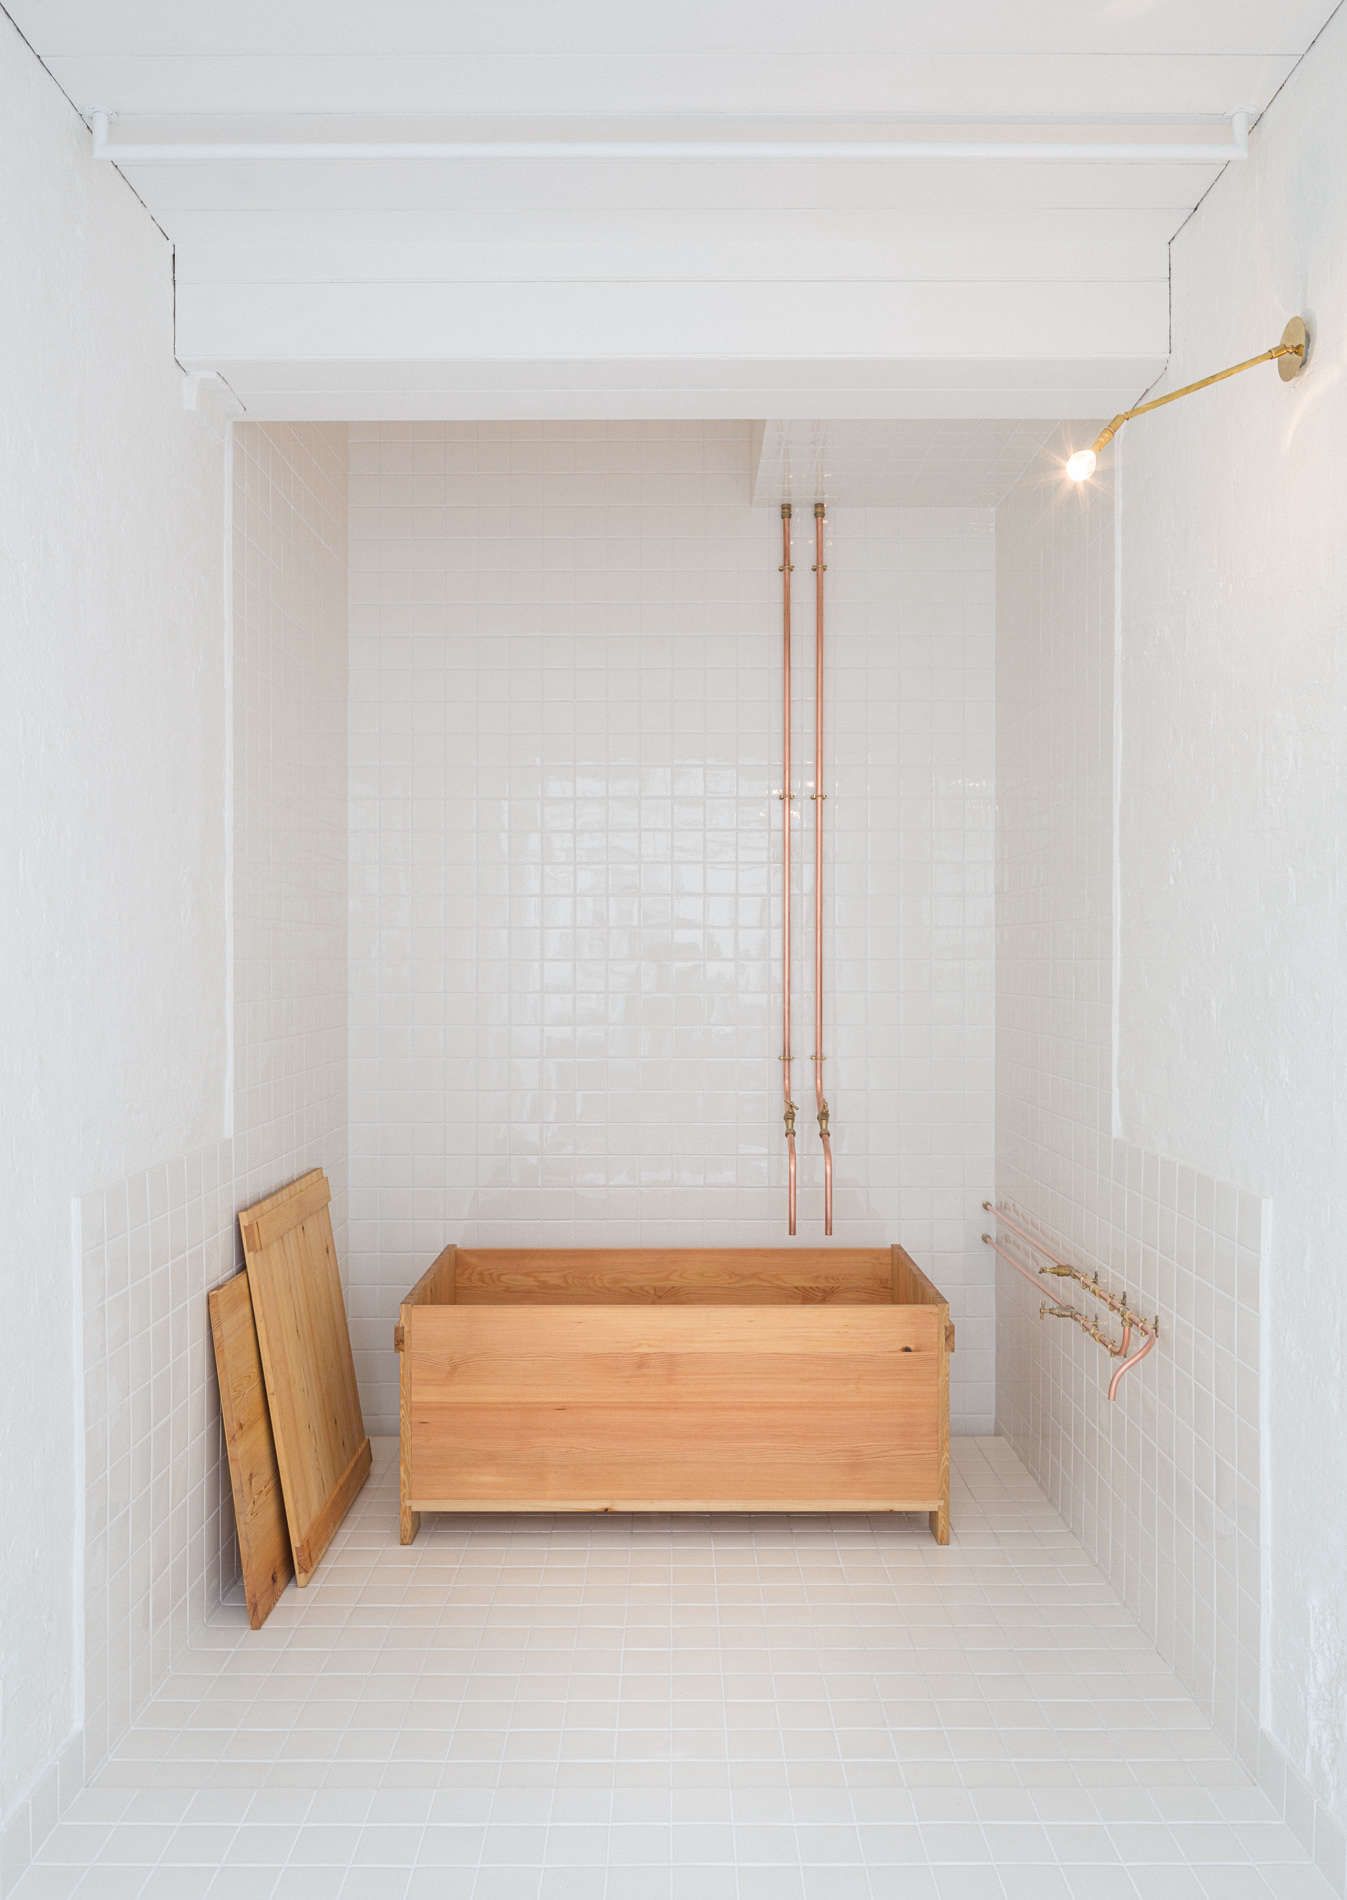 The Home Spa Reimagined, from a Dutch-Finnish Designer